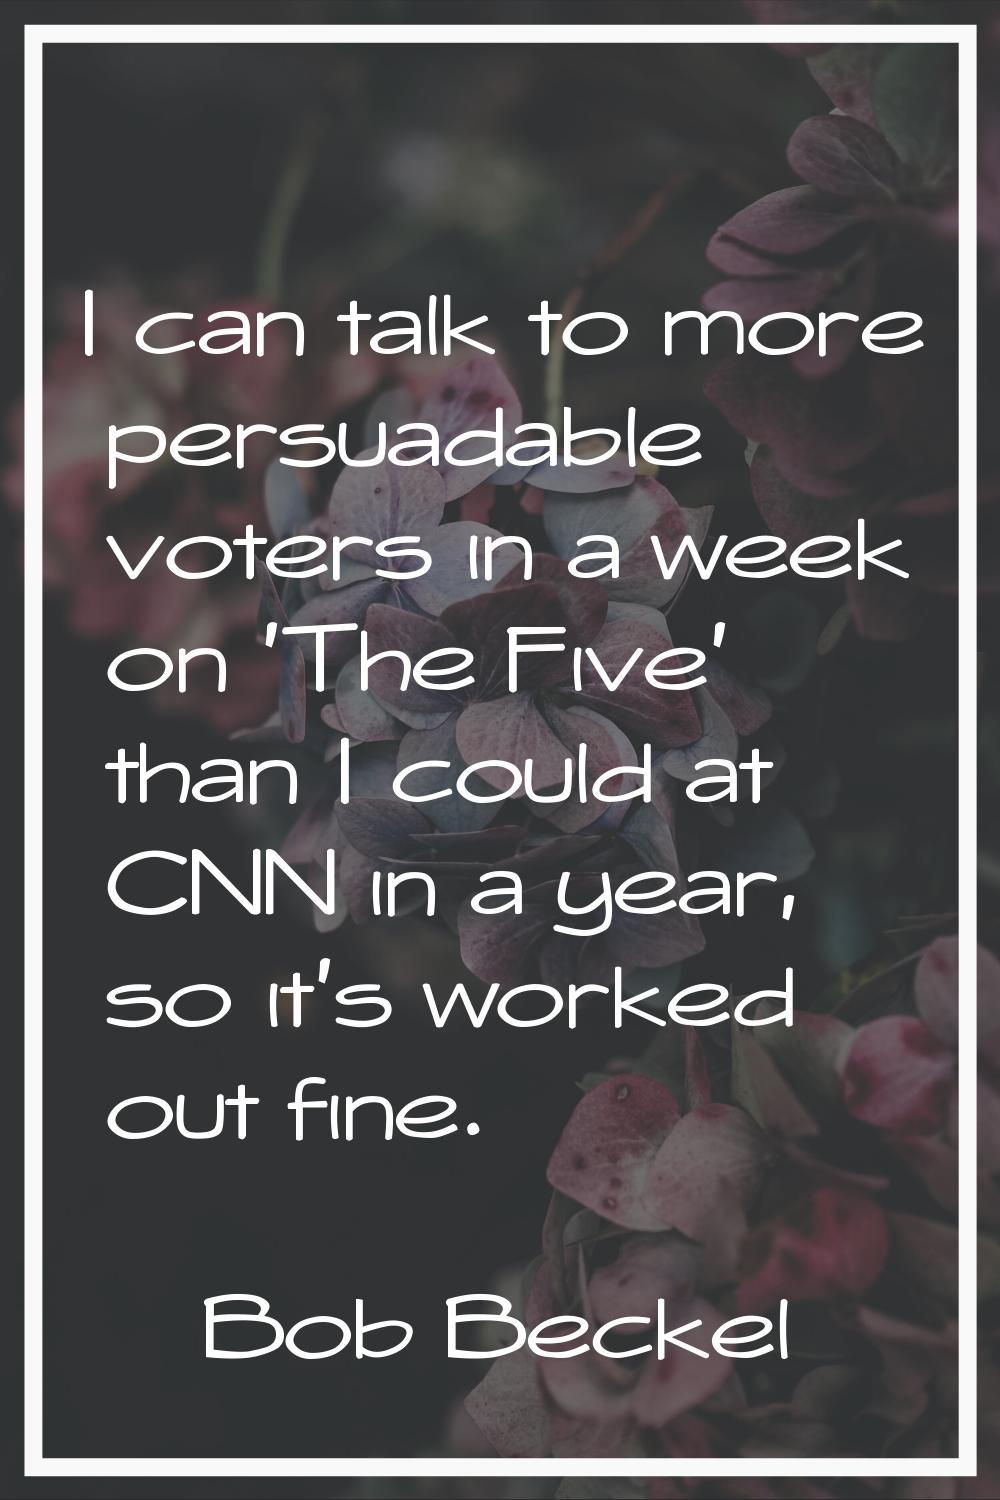 I can talk to more persuadable voters in a week on 'The Five' than I could at CNN in a year, so it'